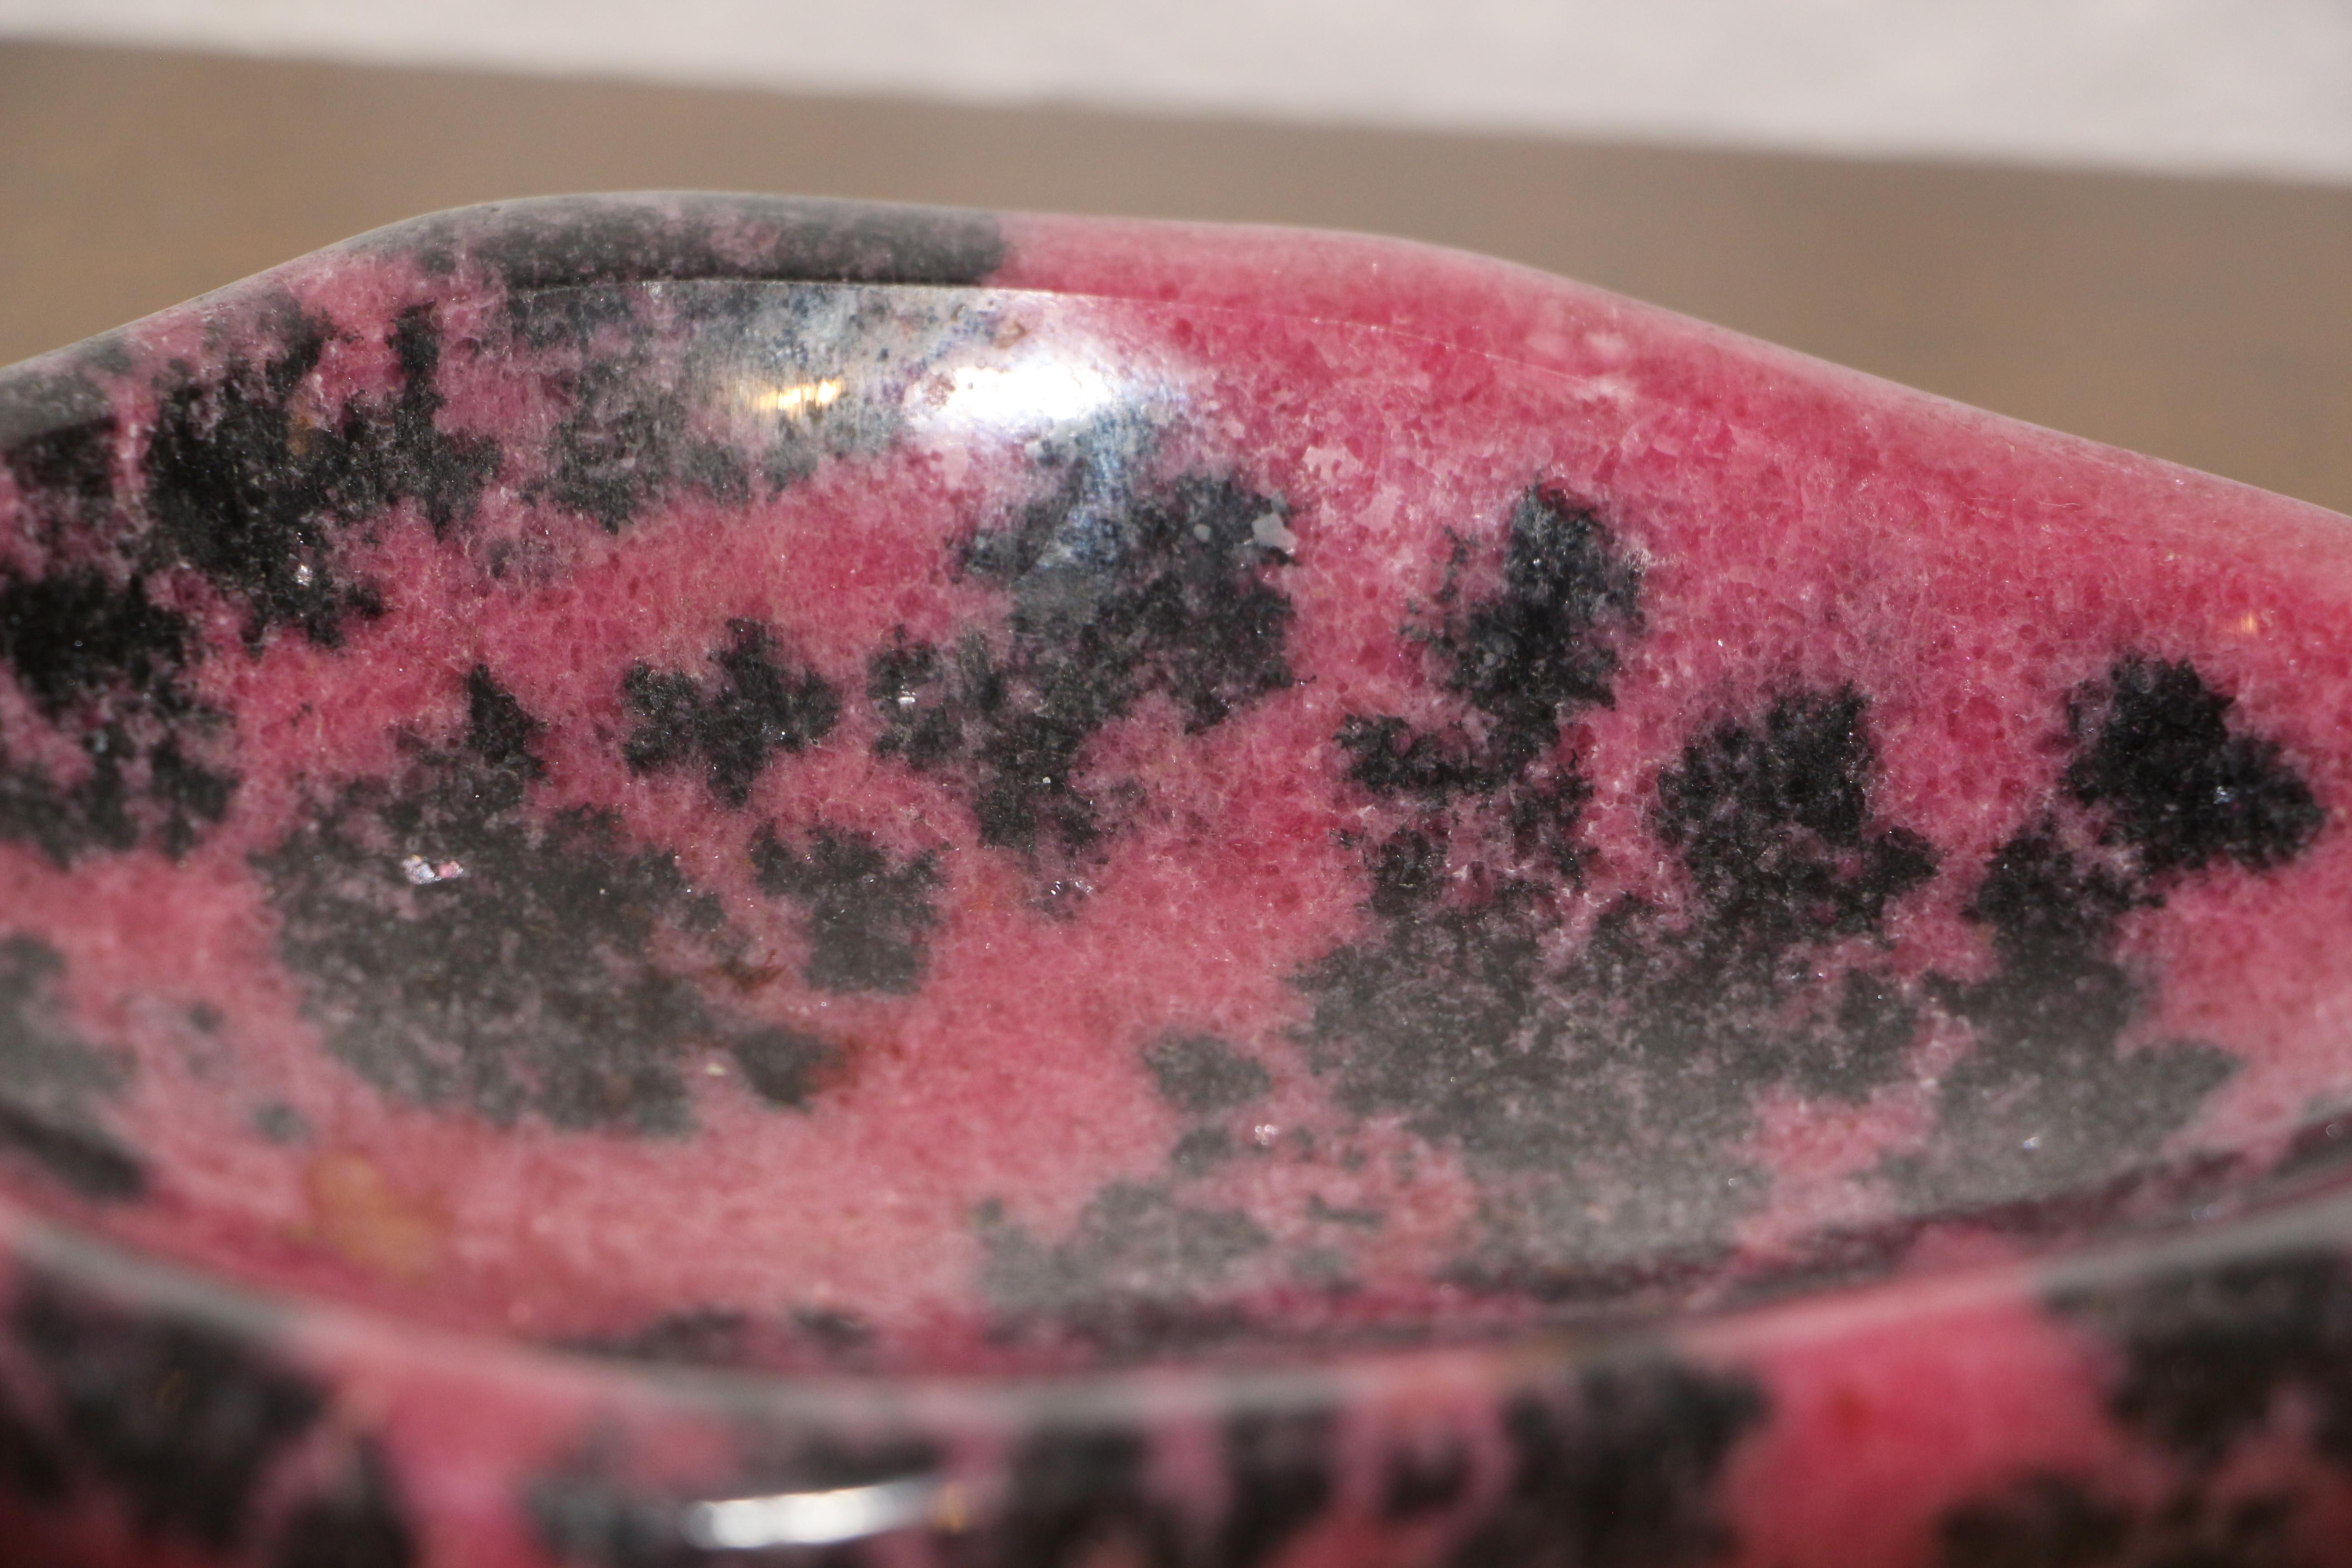 A mineral specimen bowl, rare and most collectible Rhodochrosite. If you are interested in this mineral, please be sure to have a look at a Rhodochrosite box we have listed as well. The Rhodochrosite bowl is approximate 6.75x4.75 inches and